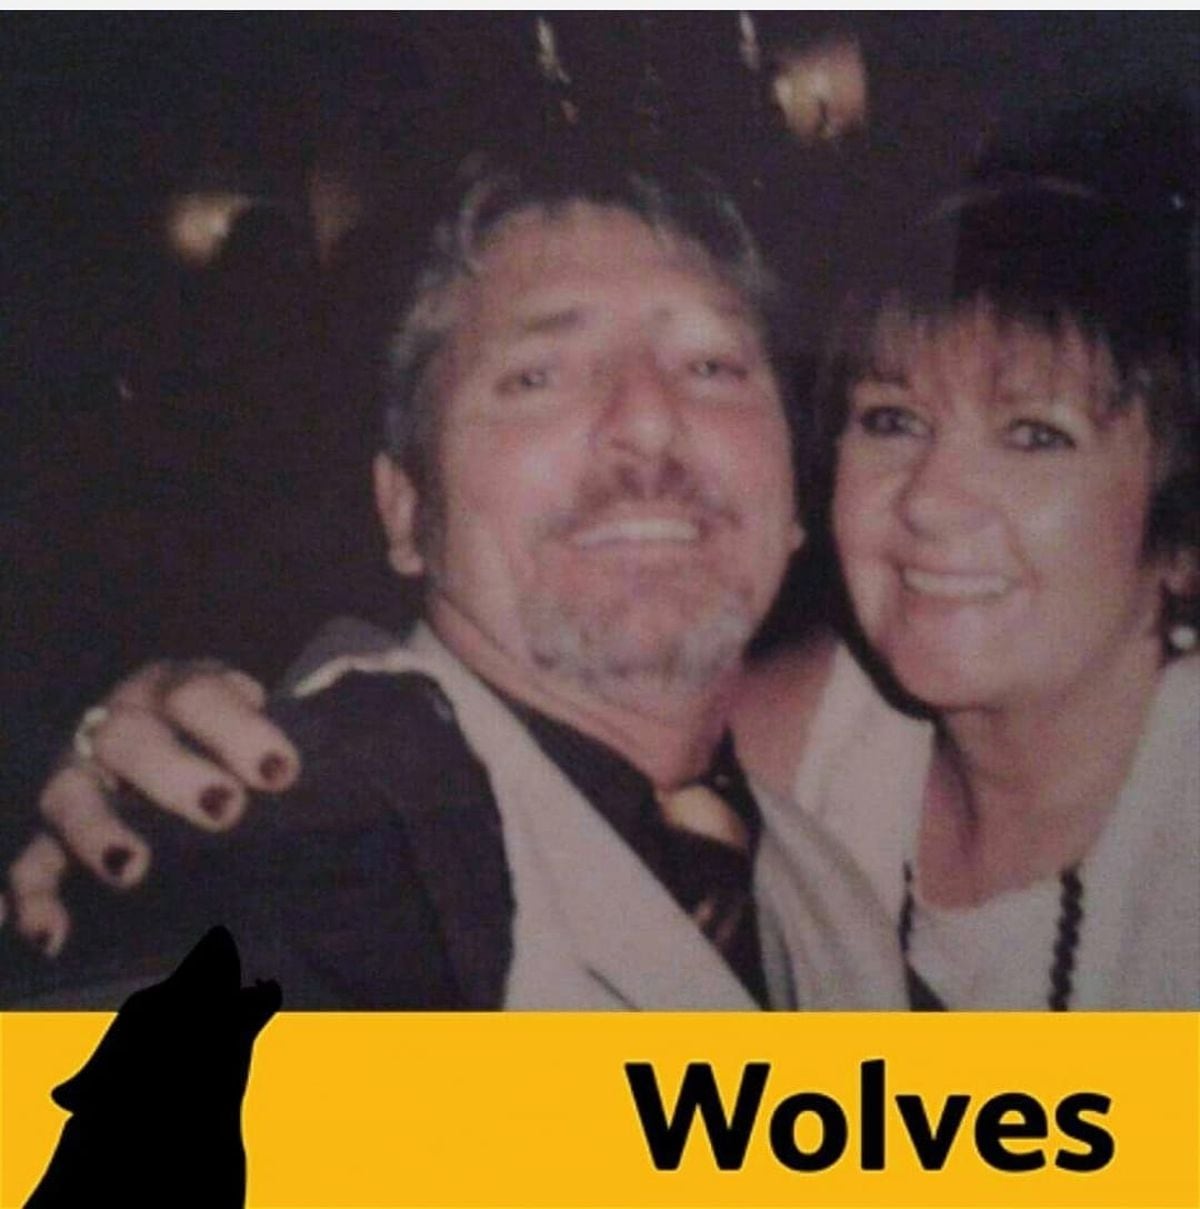 Michelle and Stephen were Wolves fans. 